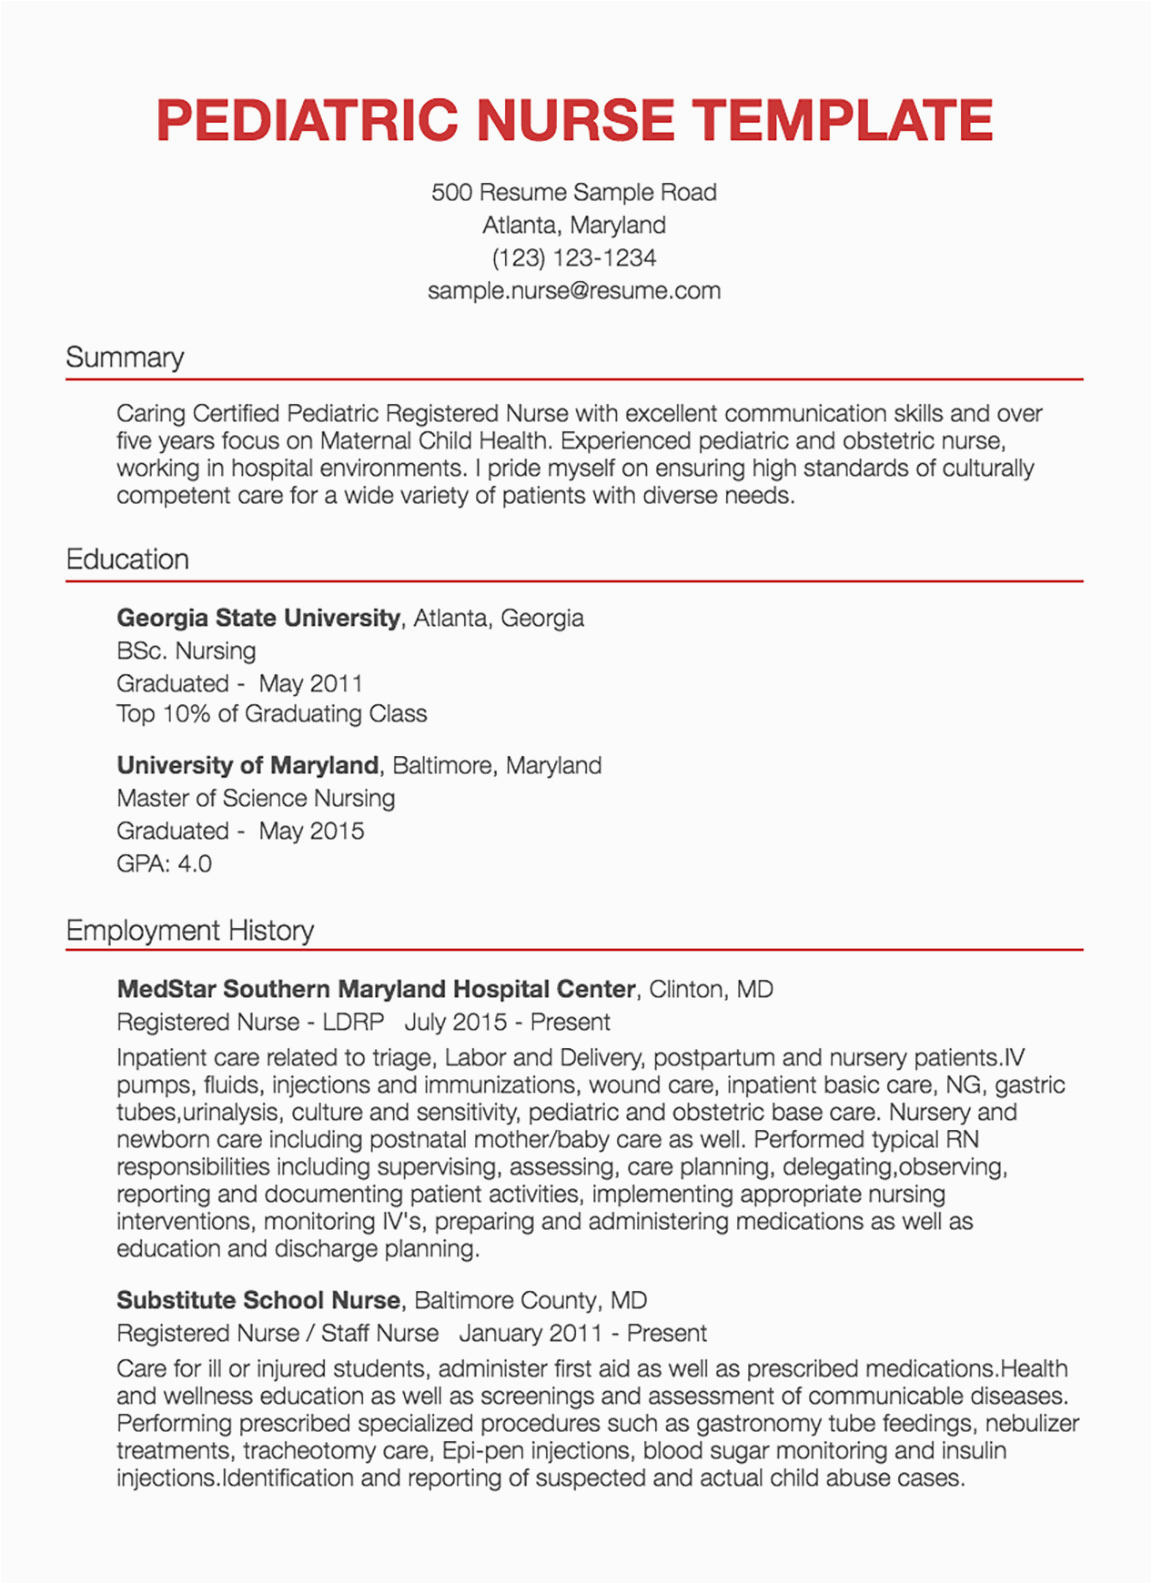 Sample Professional Summary On Resume for Nurse 30 Nursing Resume Examples & Samples Written by Rn Managers